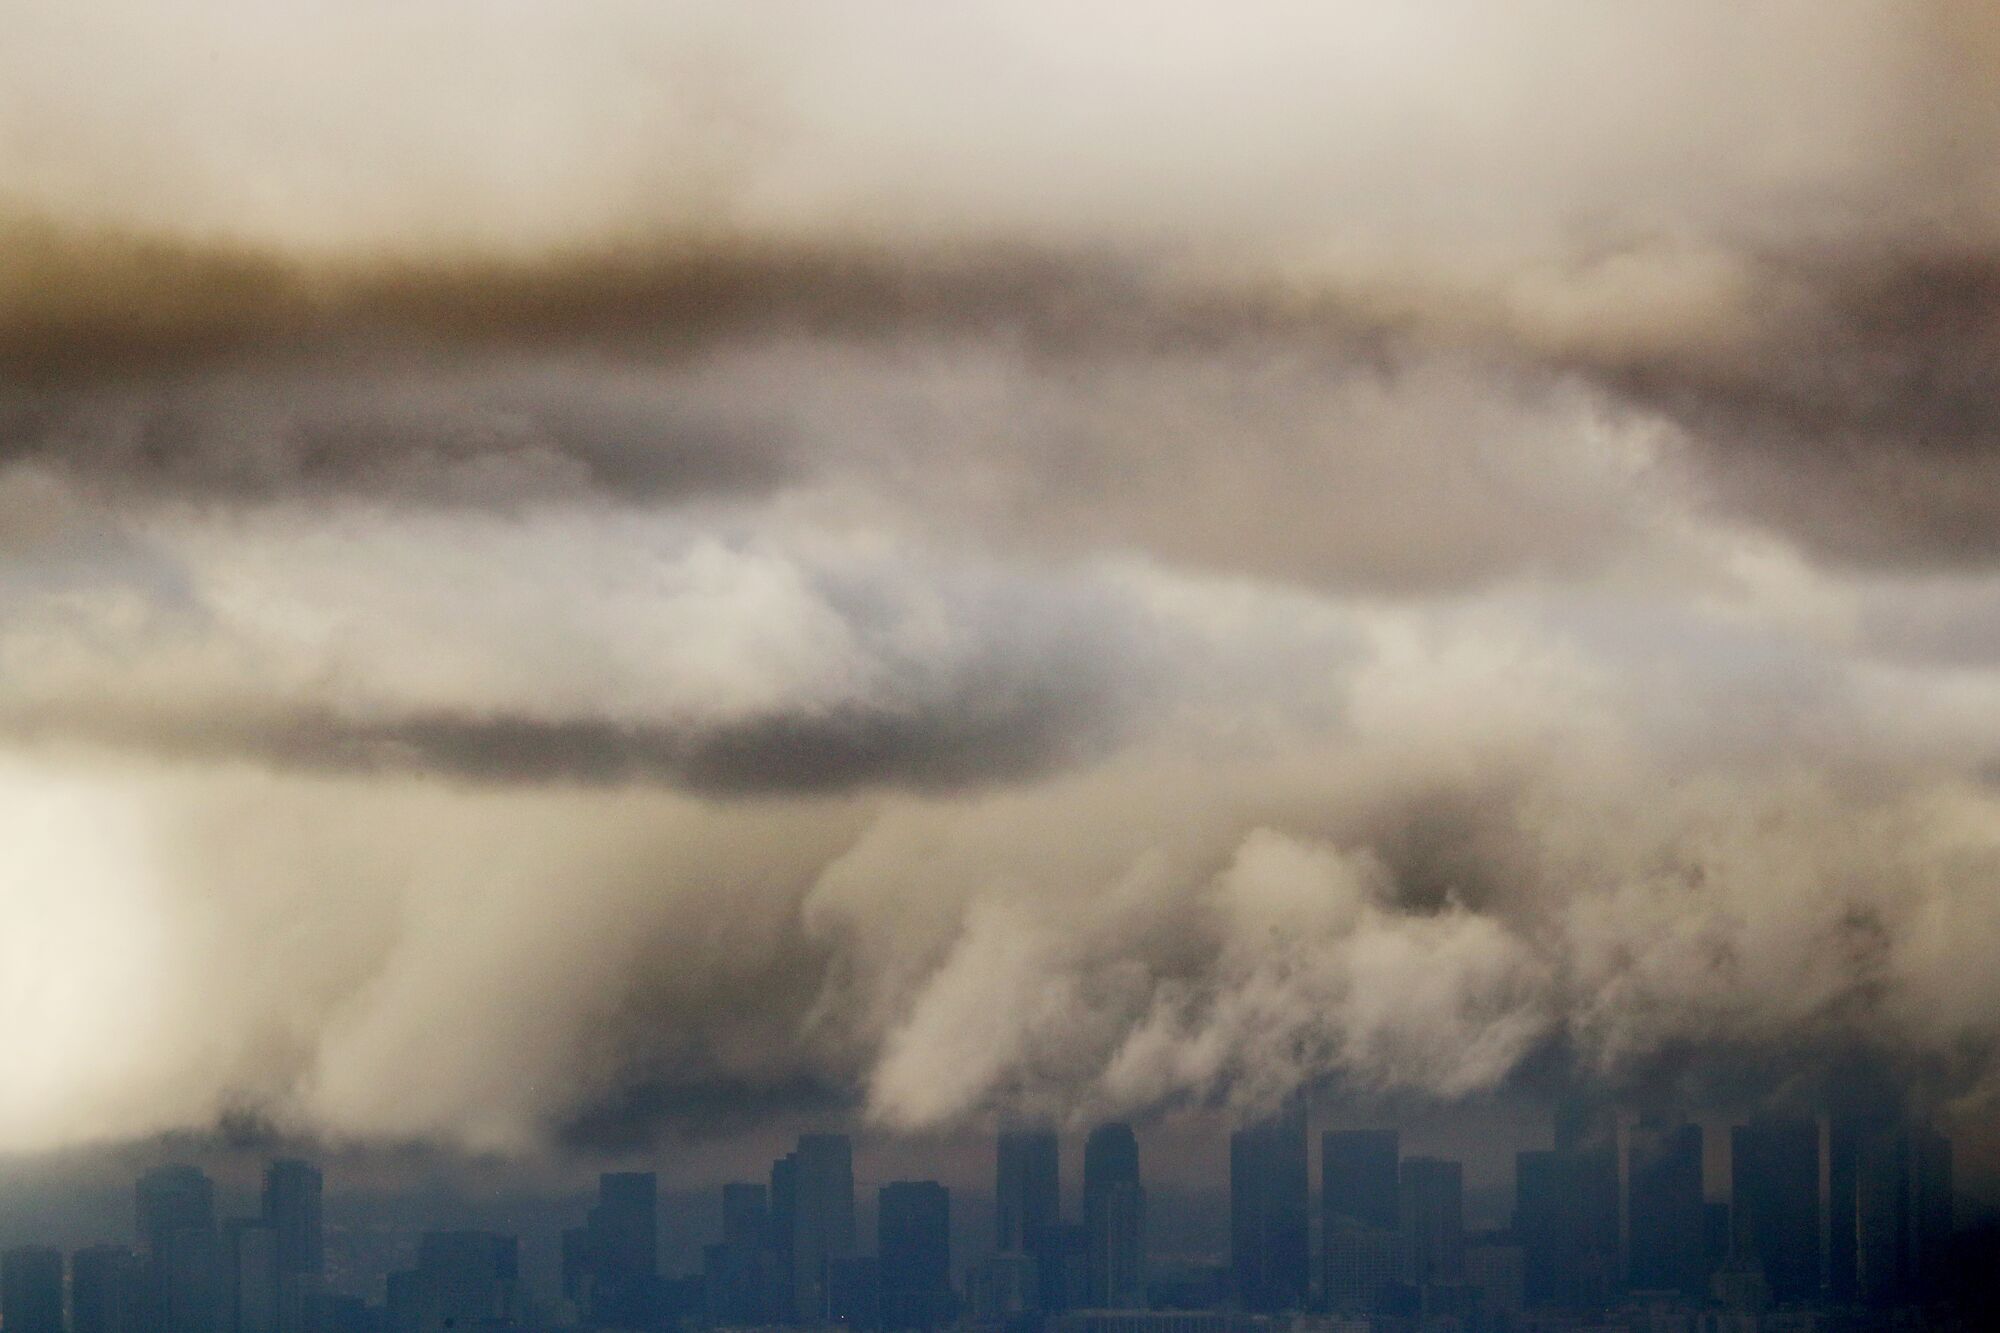 Storm clouds move over the skyline of downtown Los Angeles.